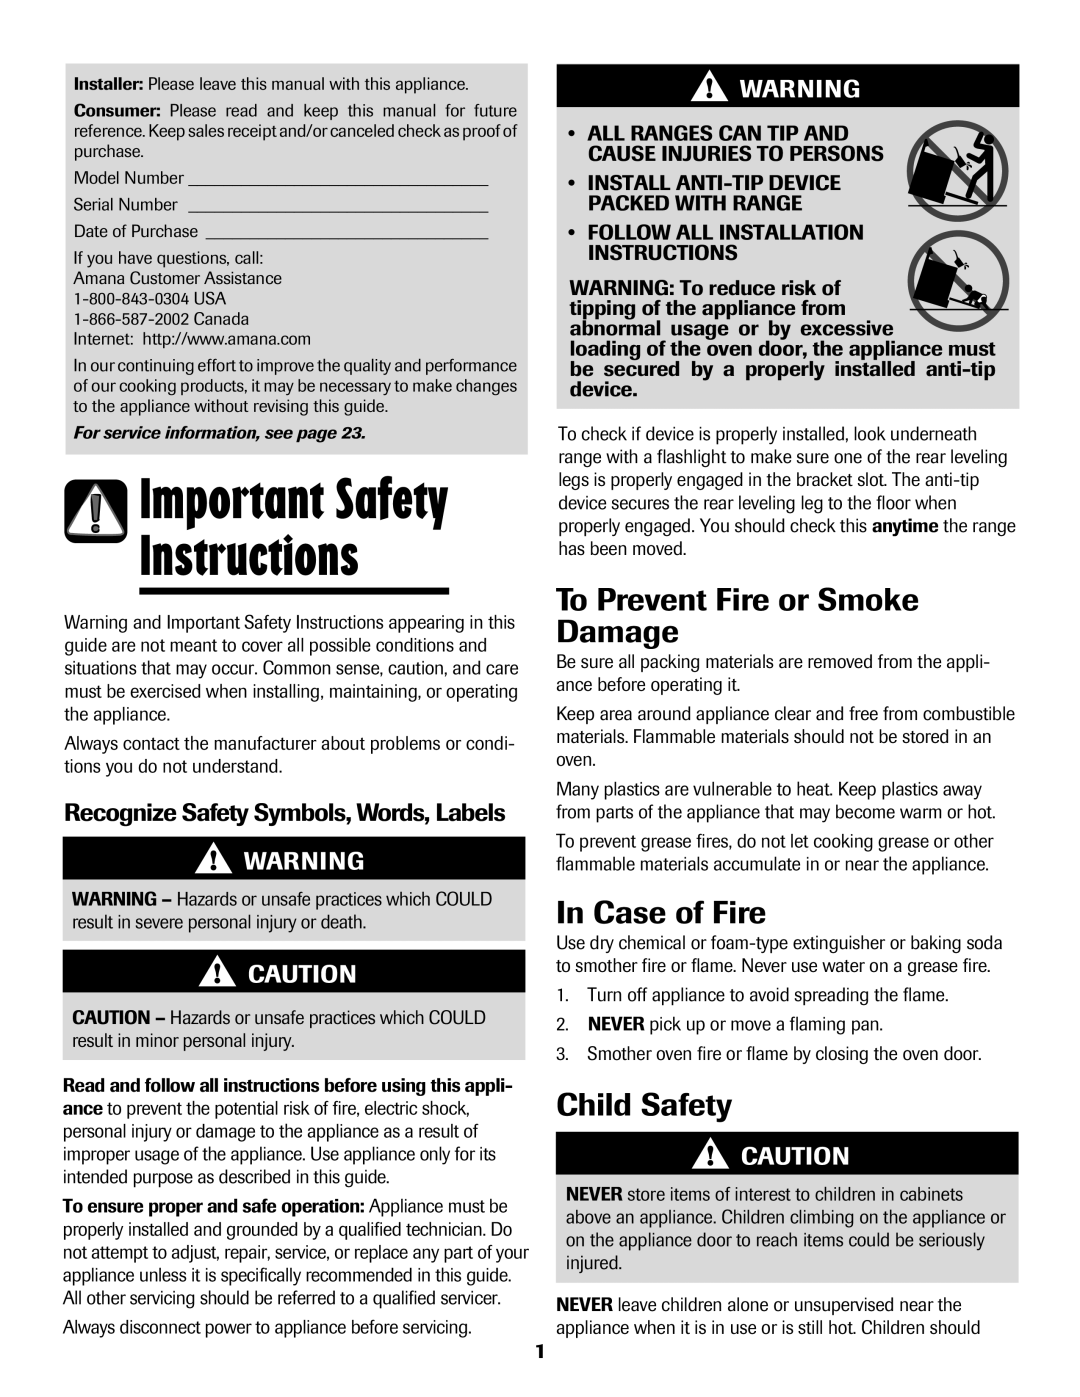 Amana Smoothtop Instructions, Important Safety, To Prevent Fire or Smoke Damage, In Case of Fire, Child Safety 